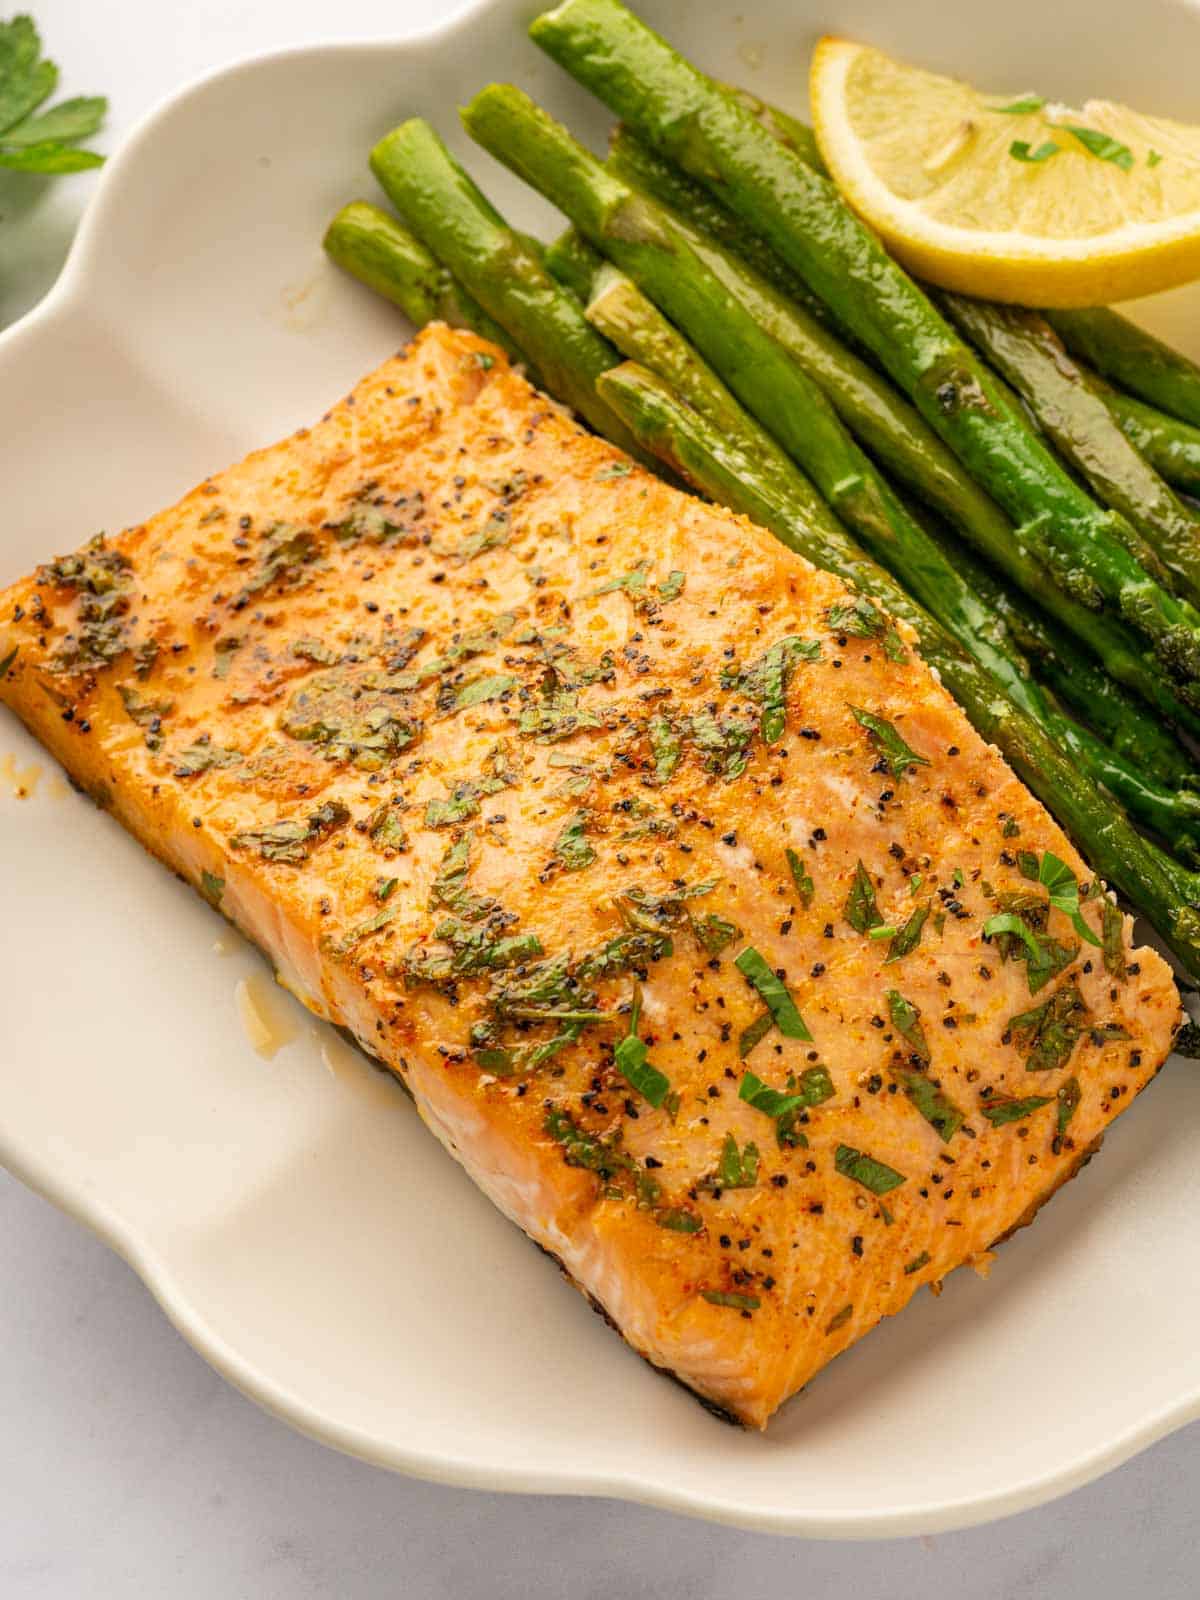 A plate with asparagus and a baked salmon filet.